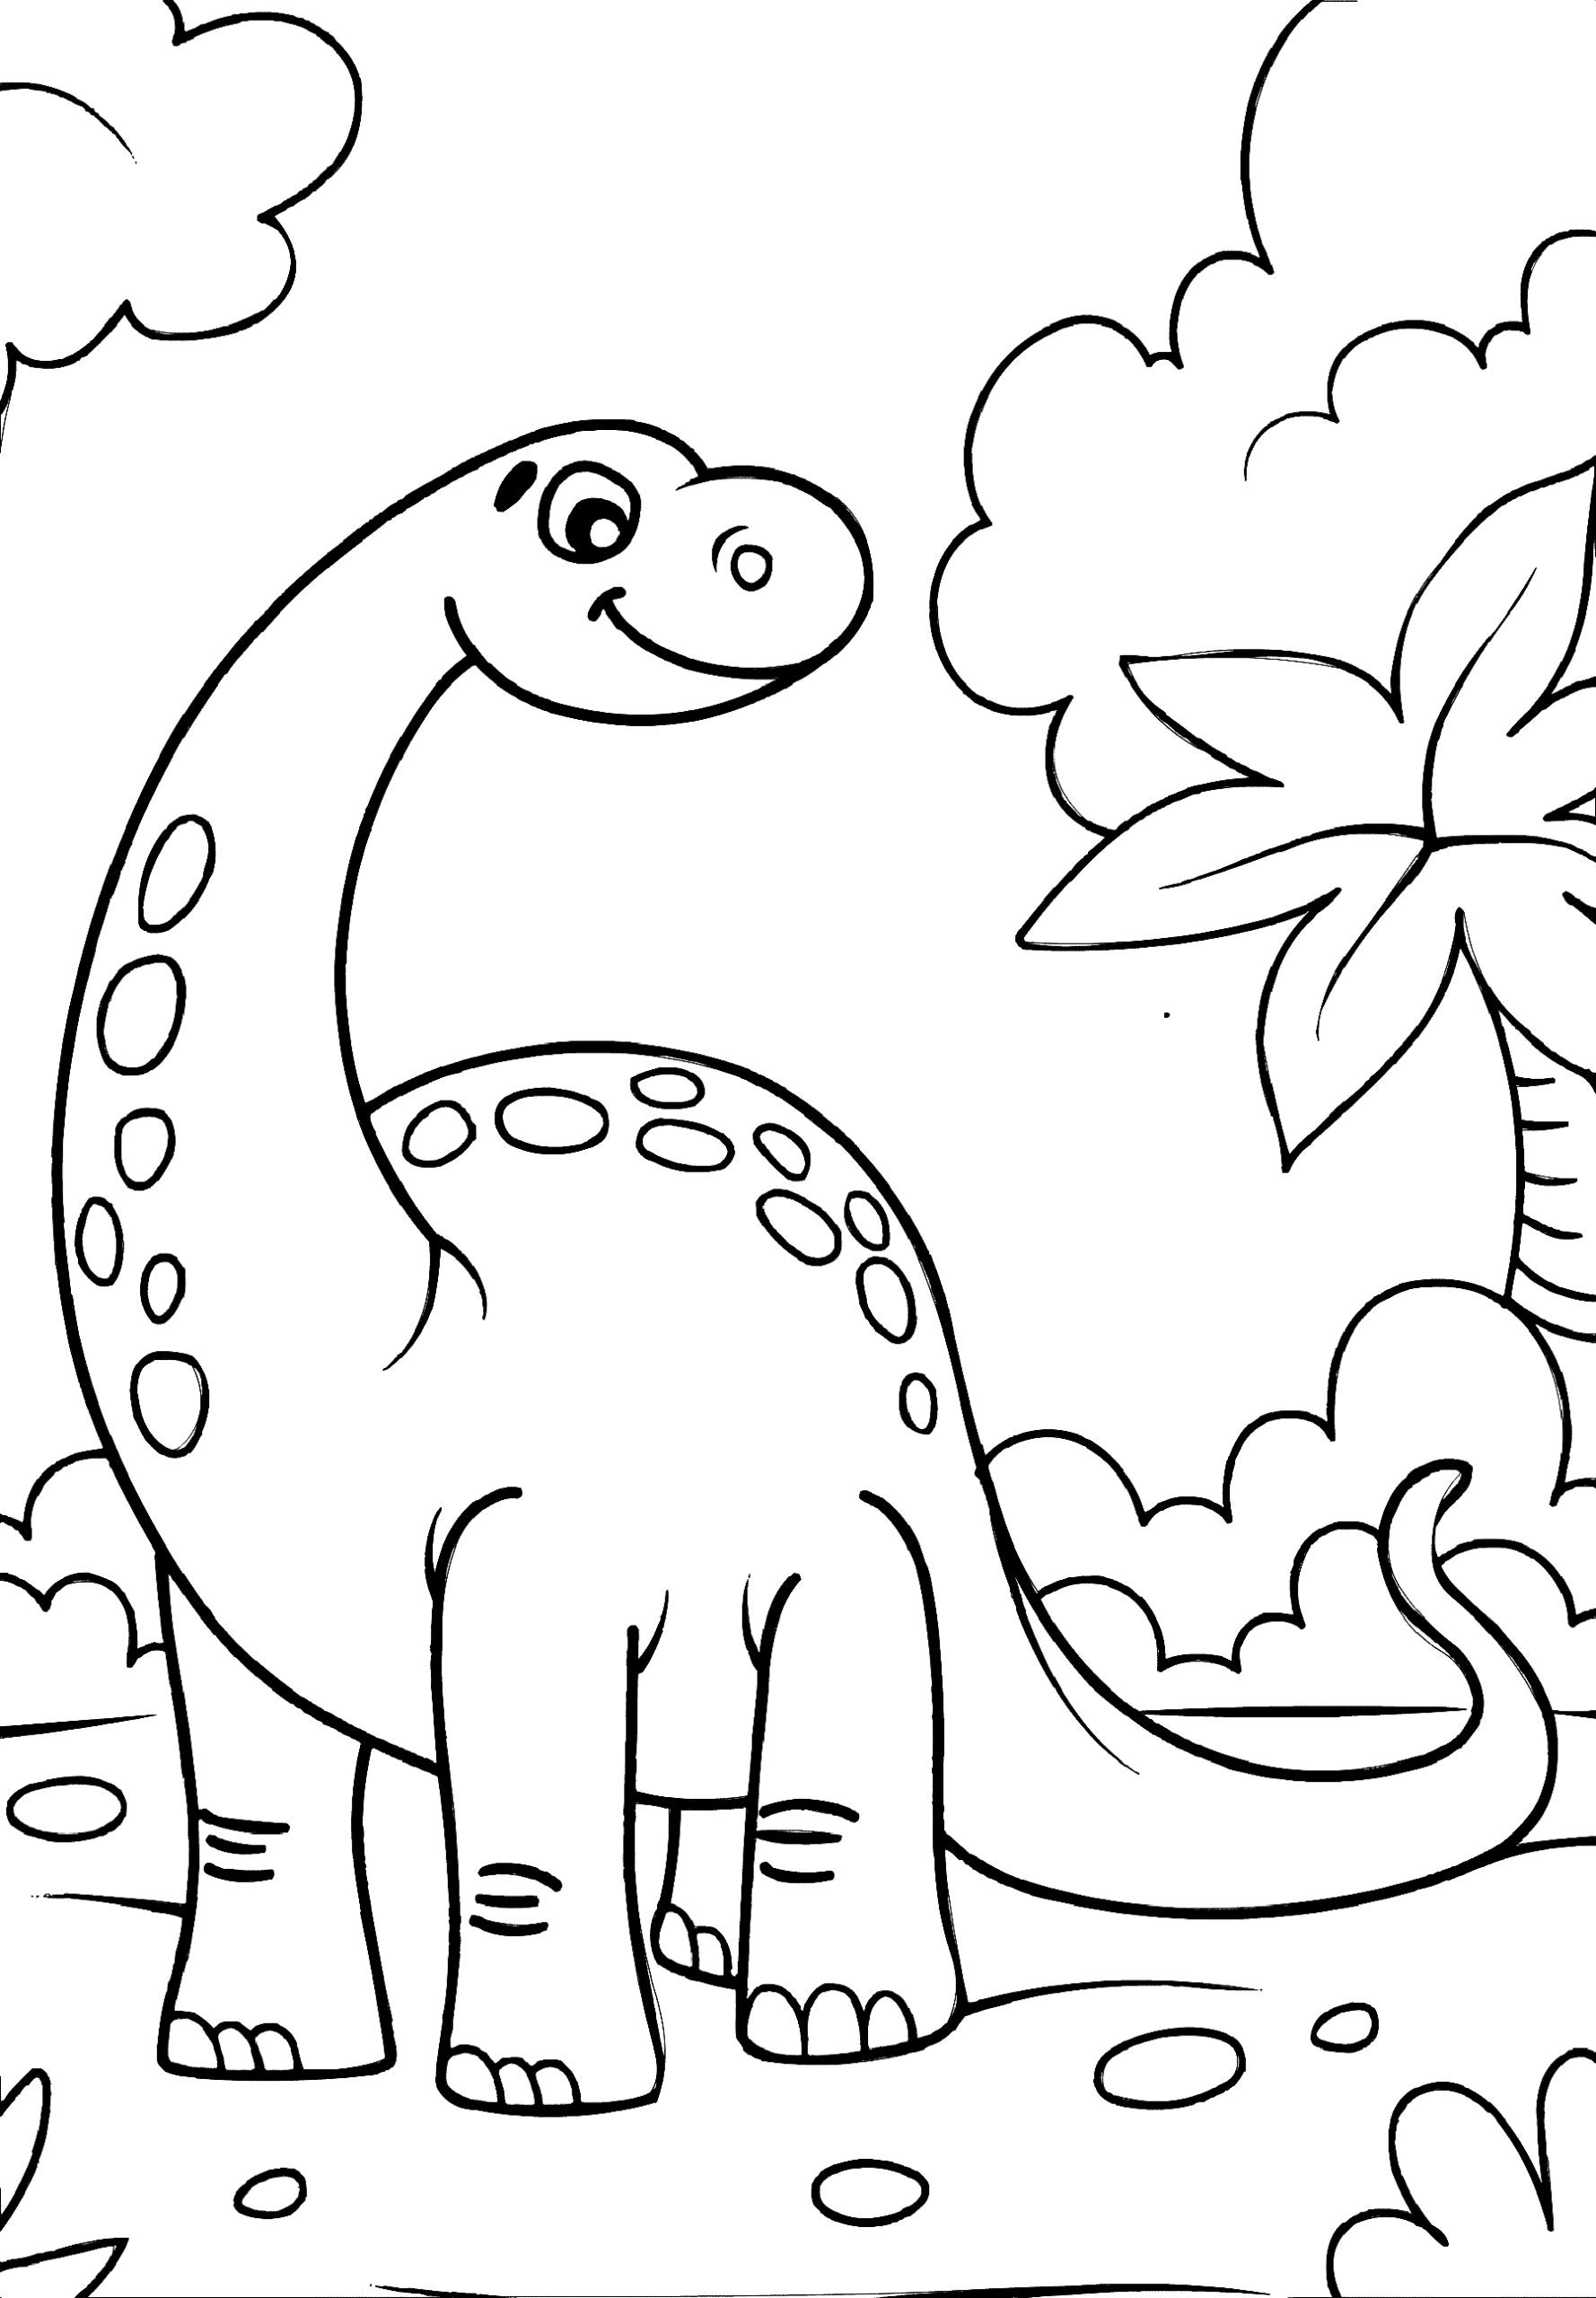 PRINTABLE Dinosaur Coloring Pages HOURS of FUN